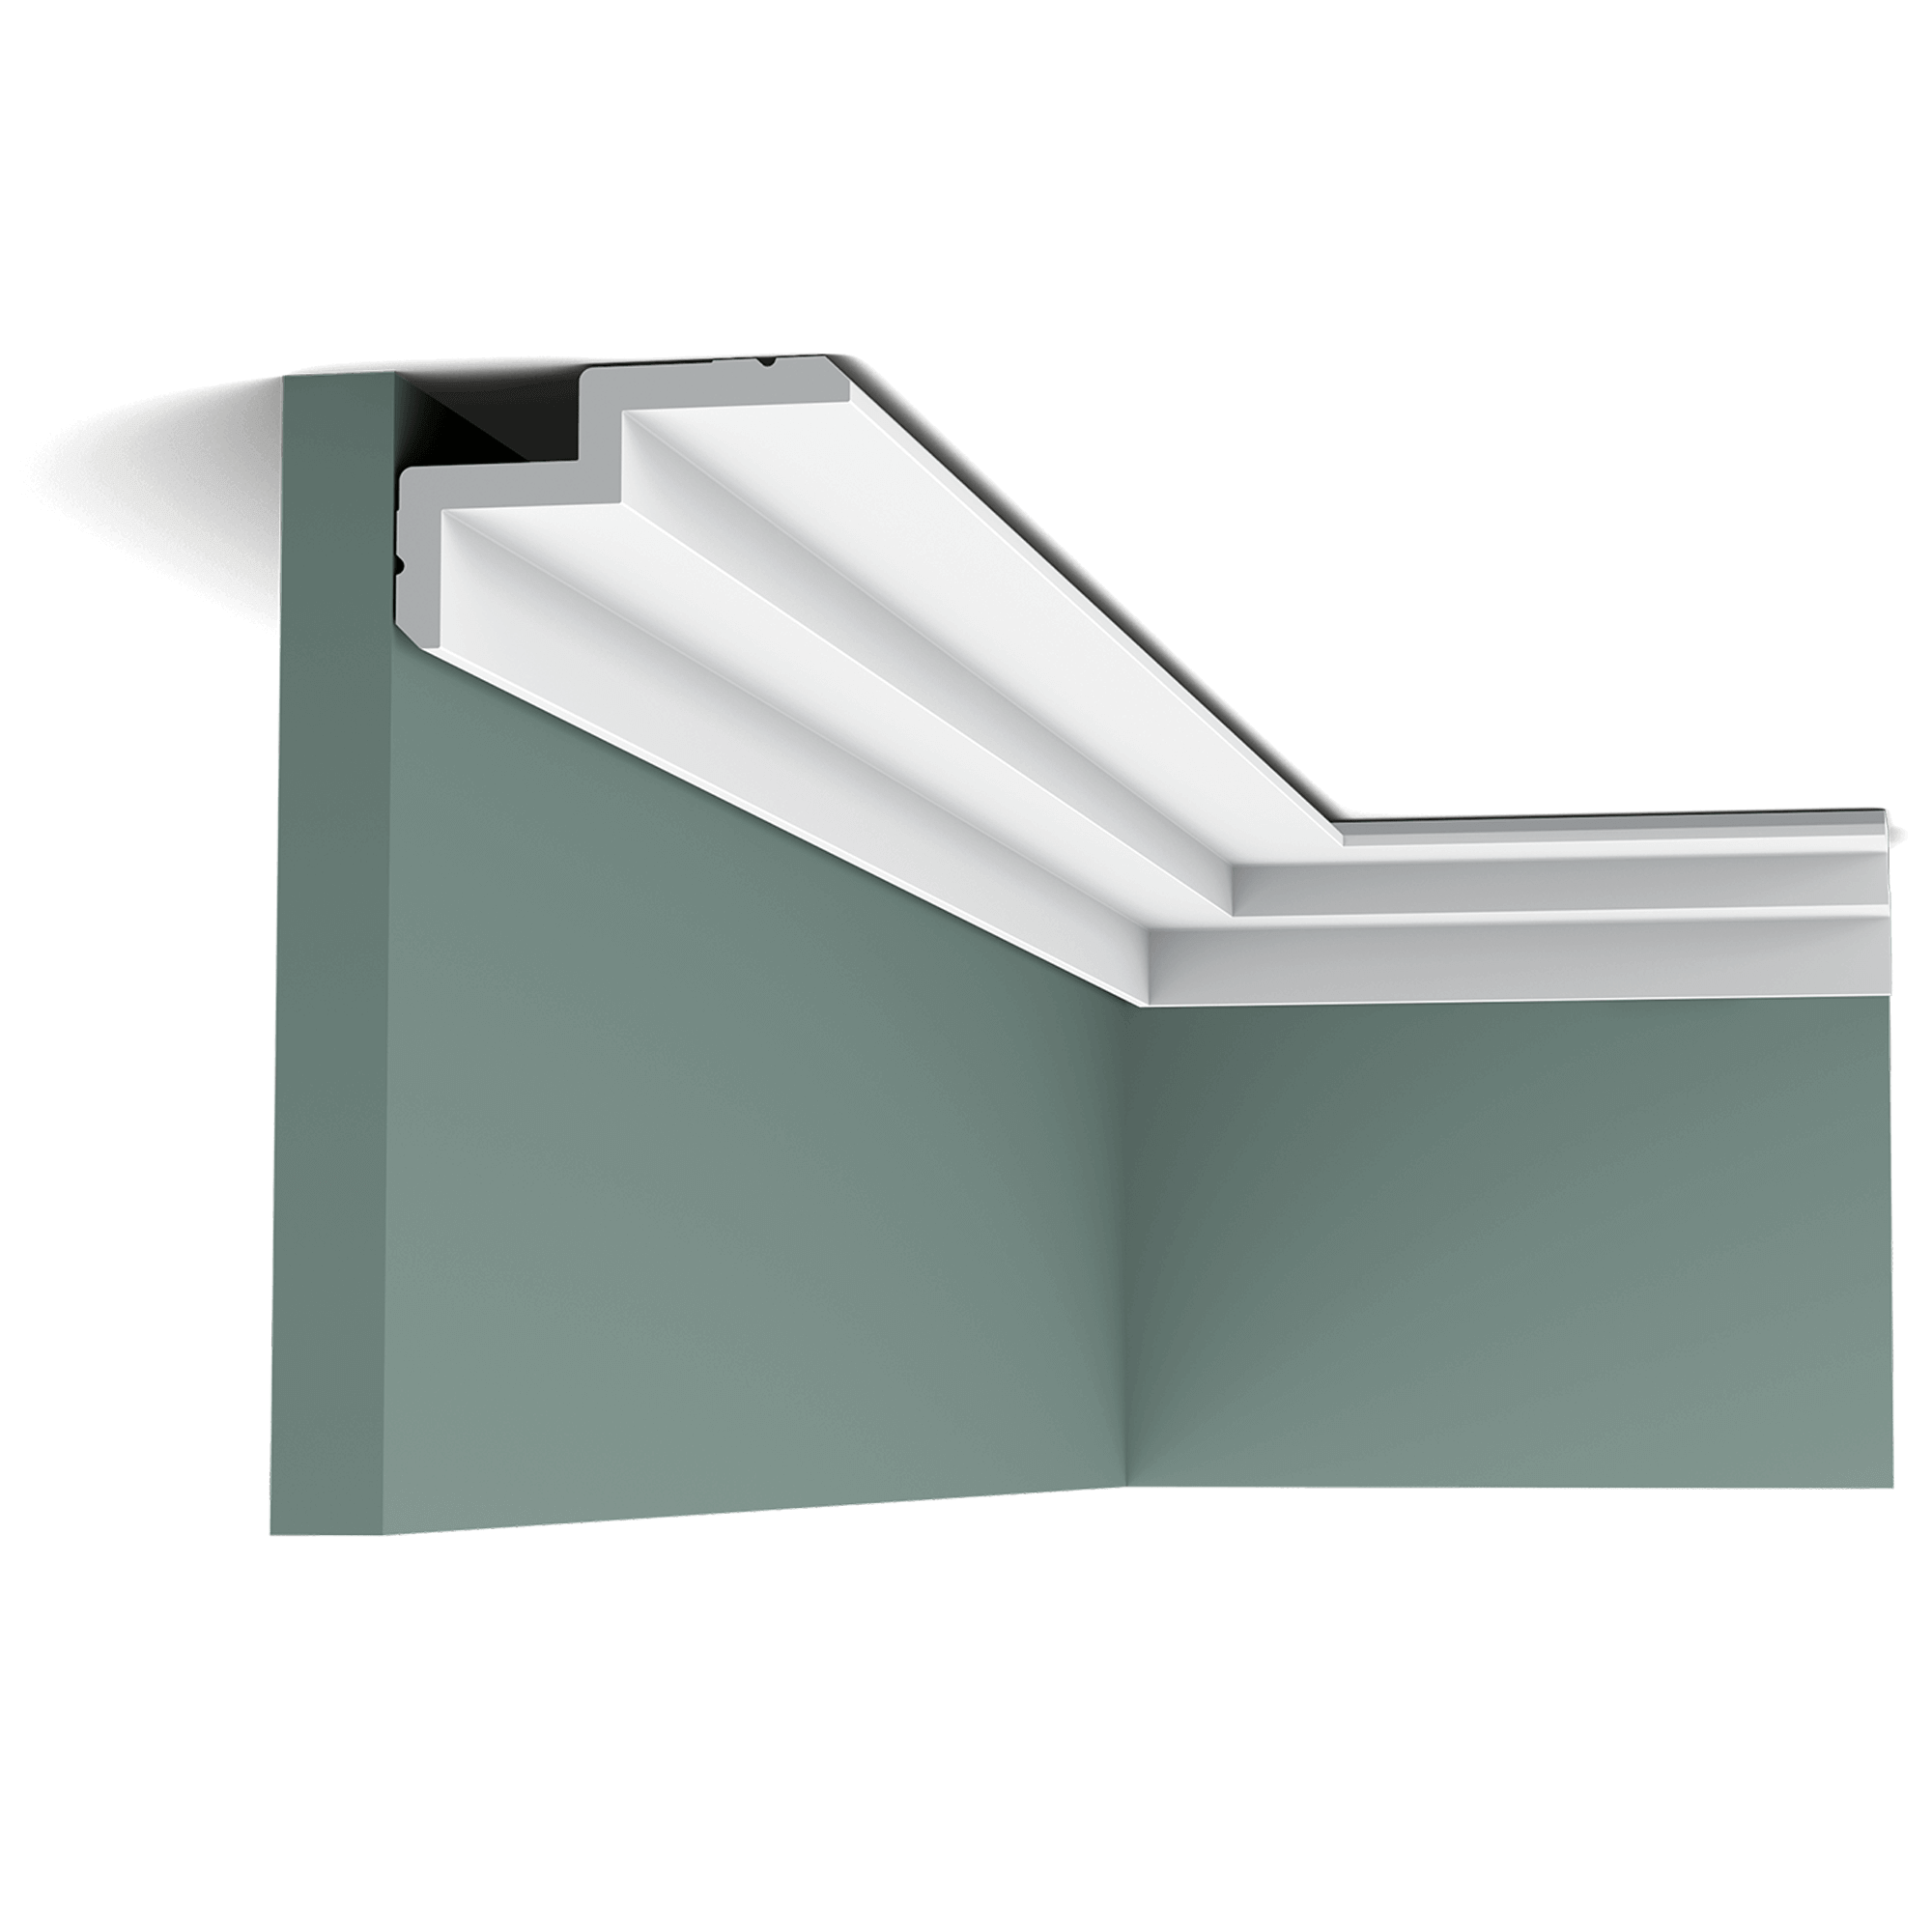 c390 cornice moulding 55fd A clean, modern profile from the Steps range. The angled corners above and below provide additional subtle shadow lines. Designed by Orio Tonini.